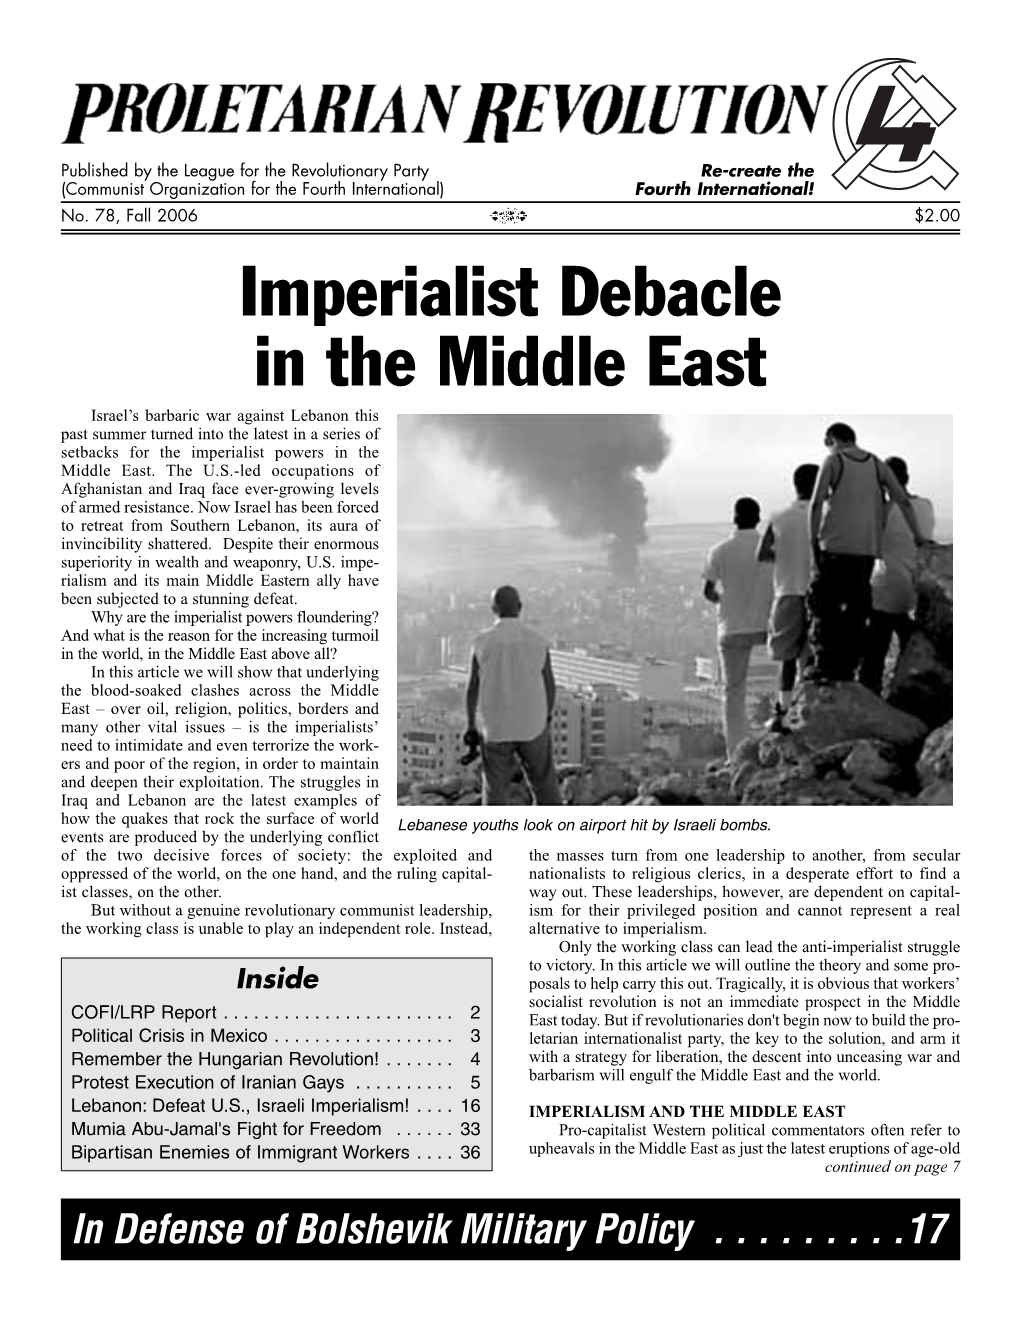 Imperialist Debacle in the Middle East